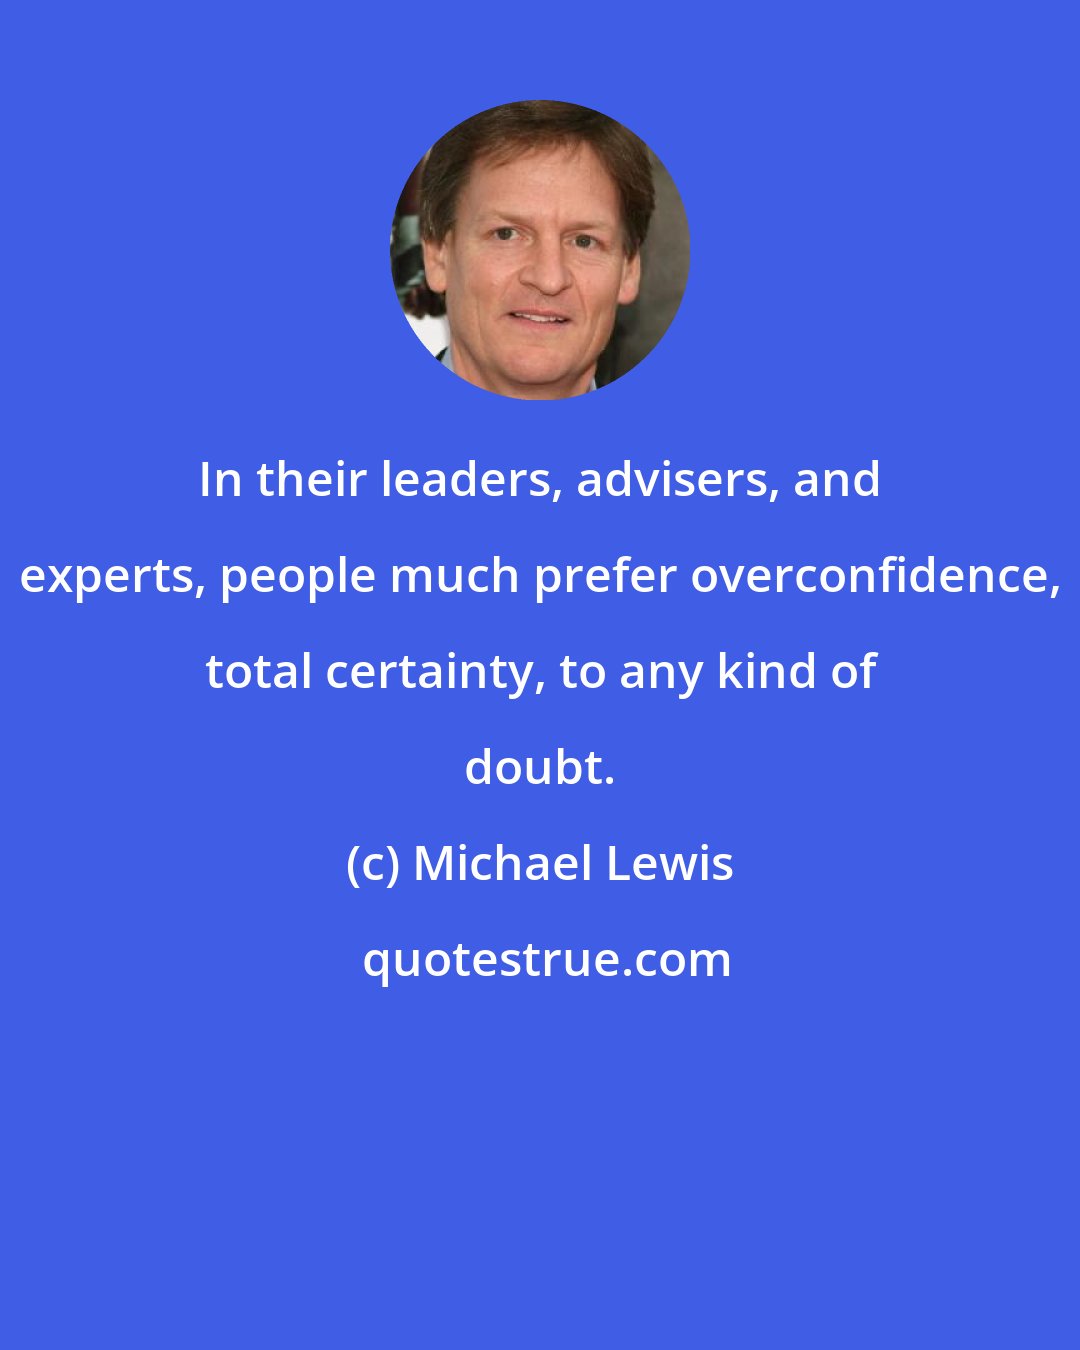 Michael Lewis: In their leaders, advisers, and experts, people much prefer overconfidence, total certainty, to any kind of doubt.